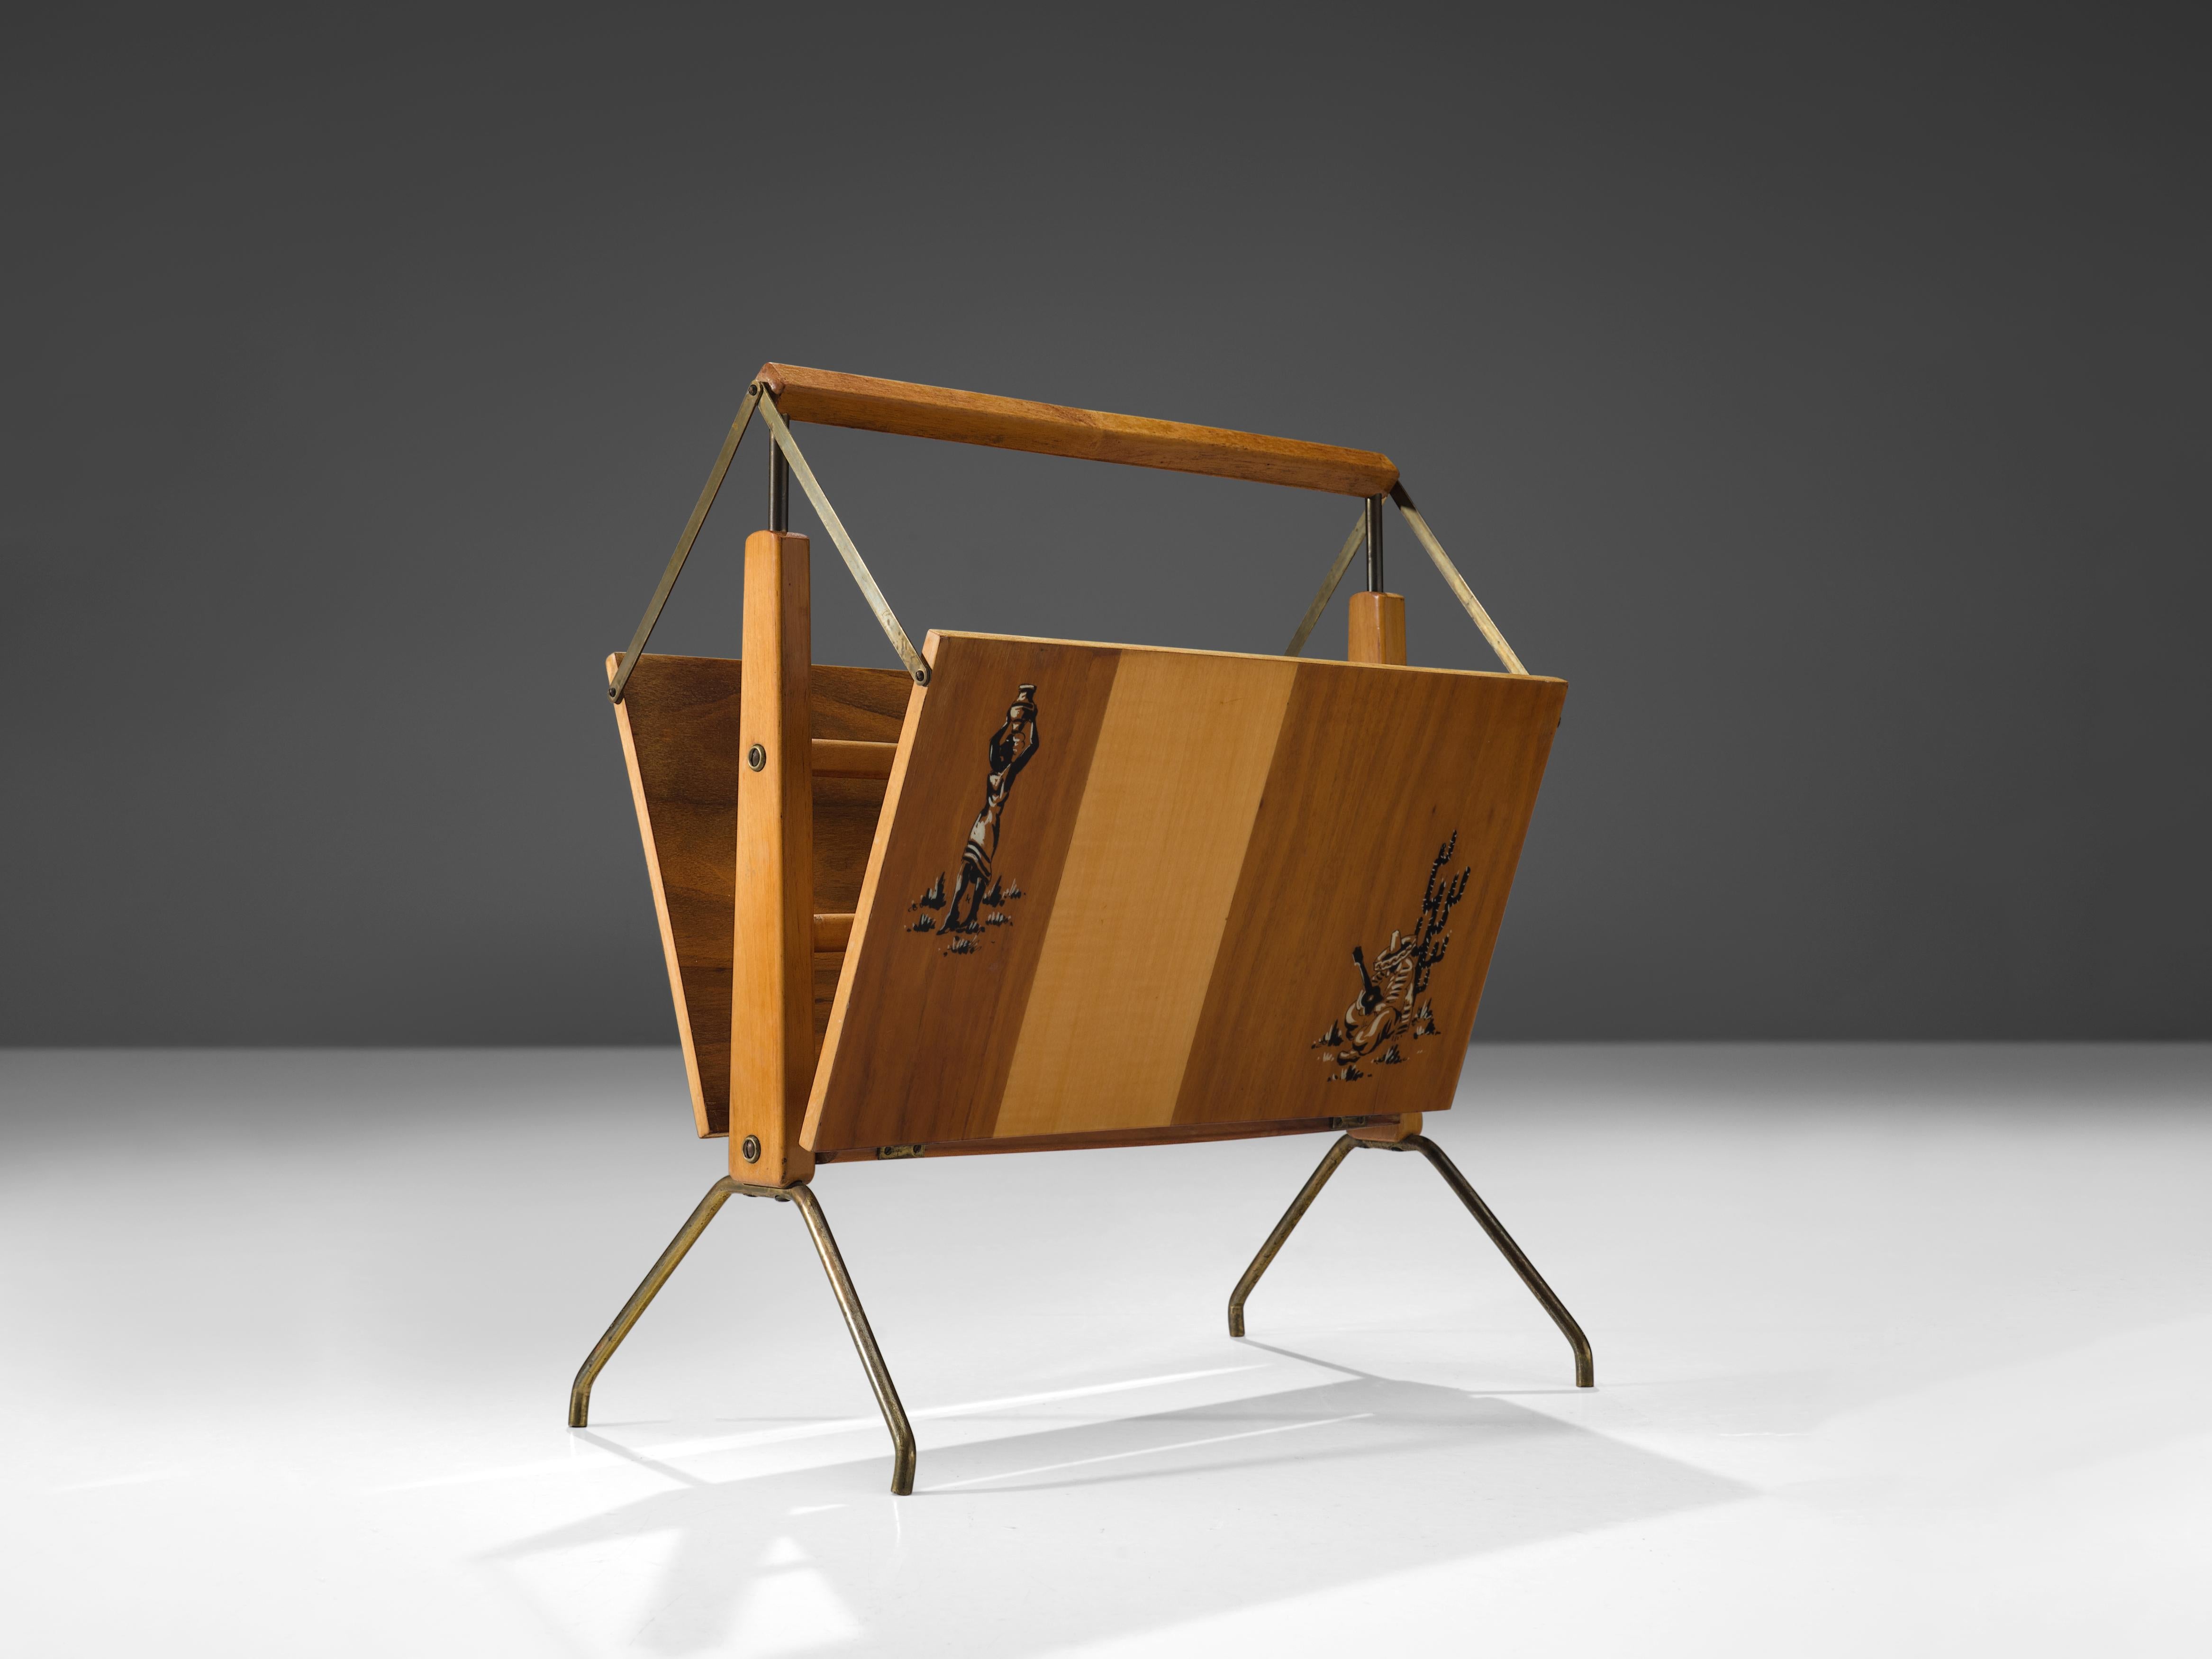 Italian Foldable Magazine Rack in Walnut and Brass with Illustrations